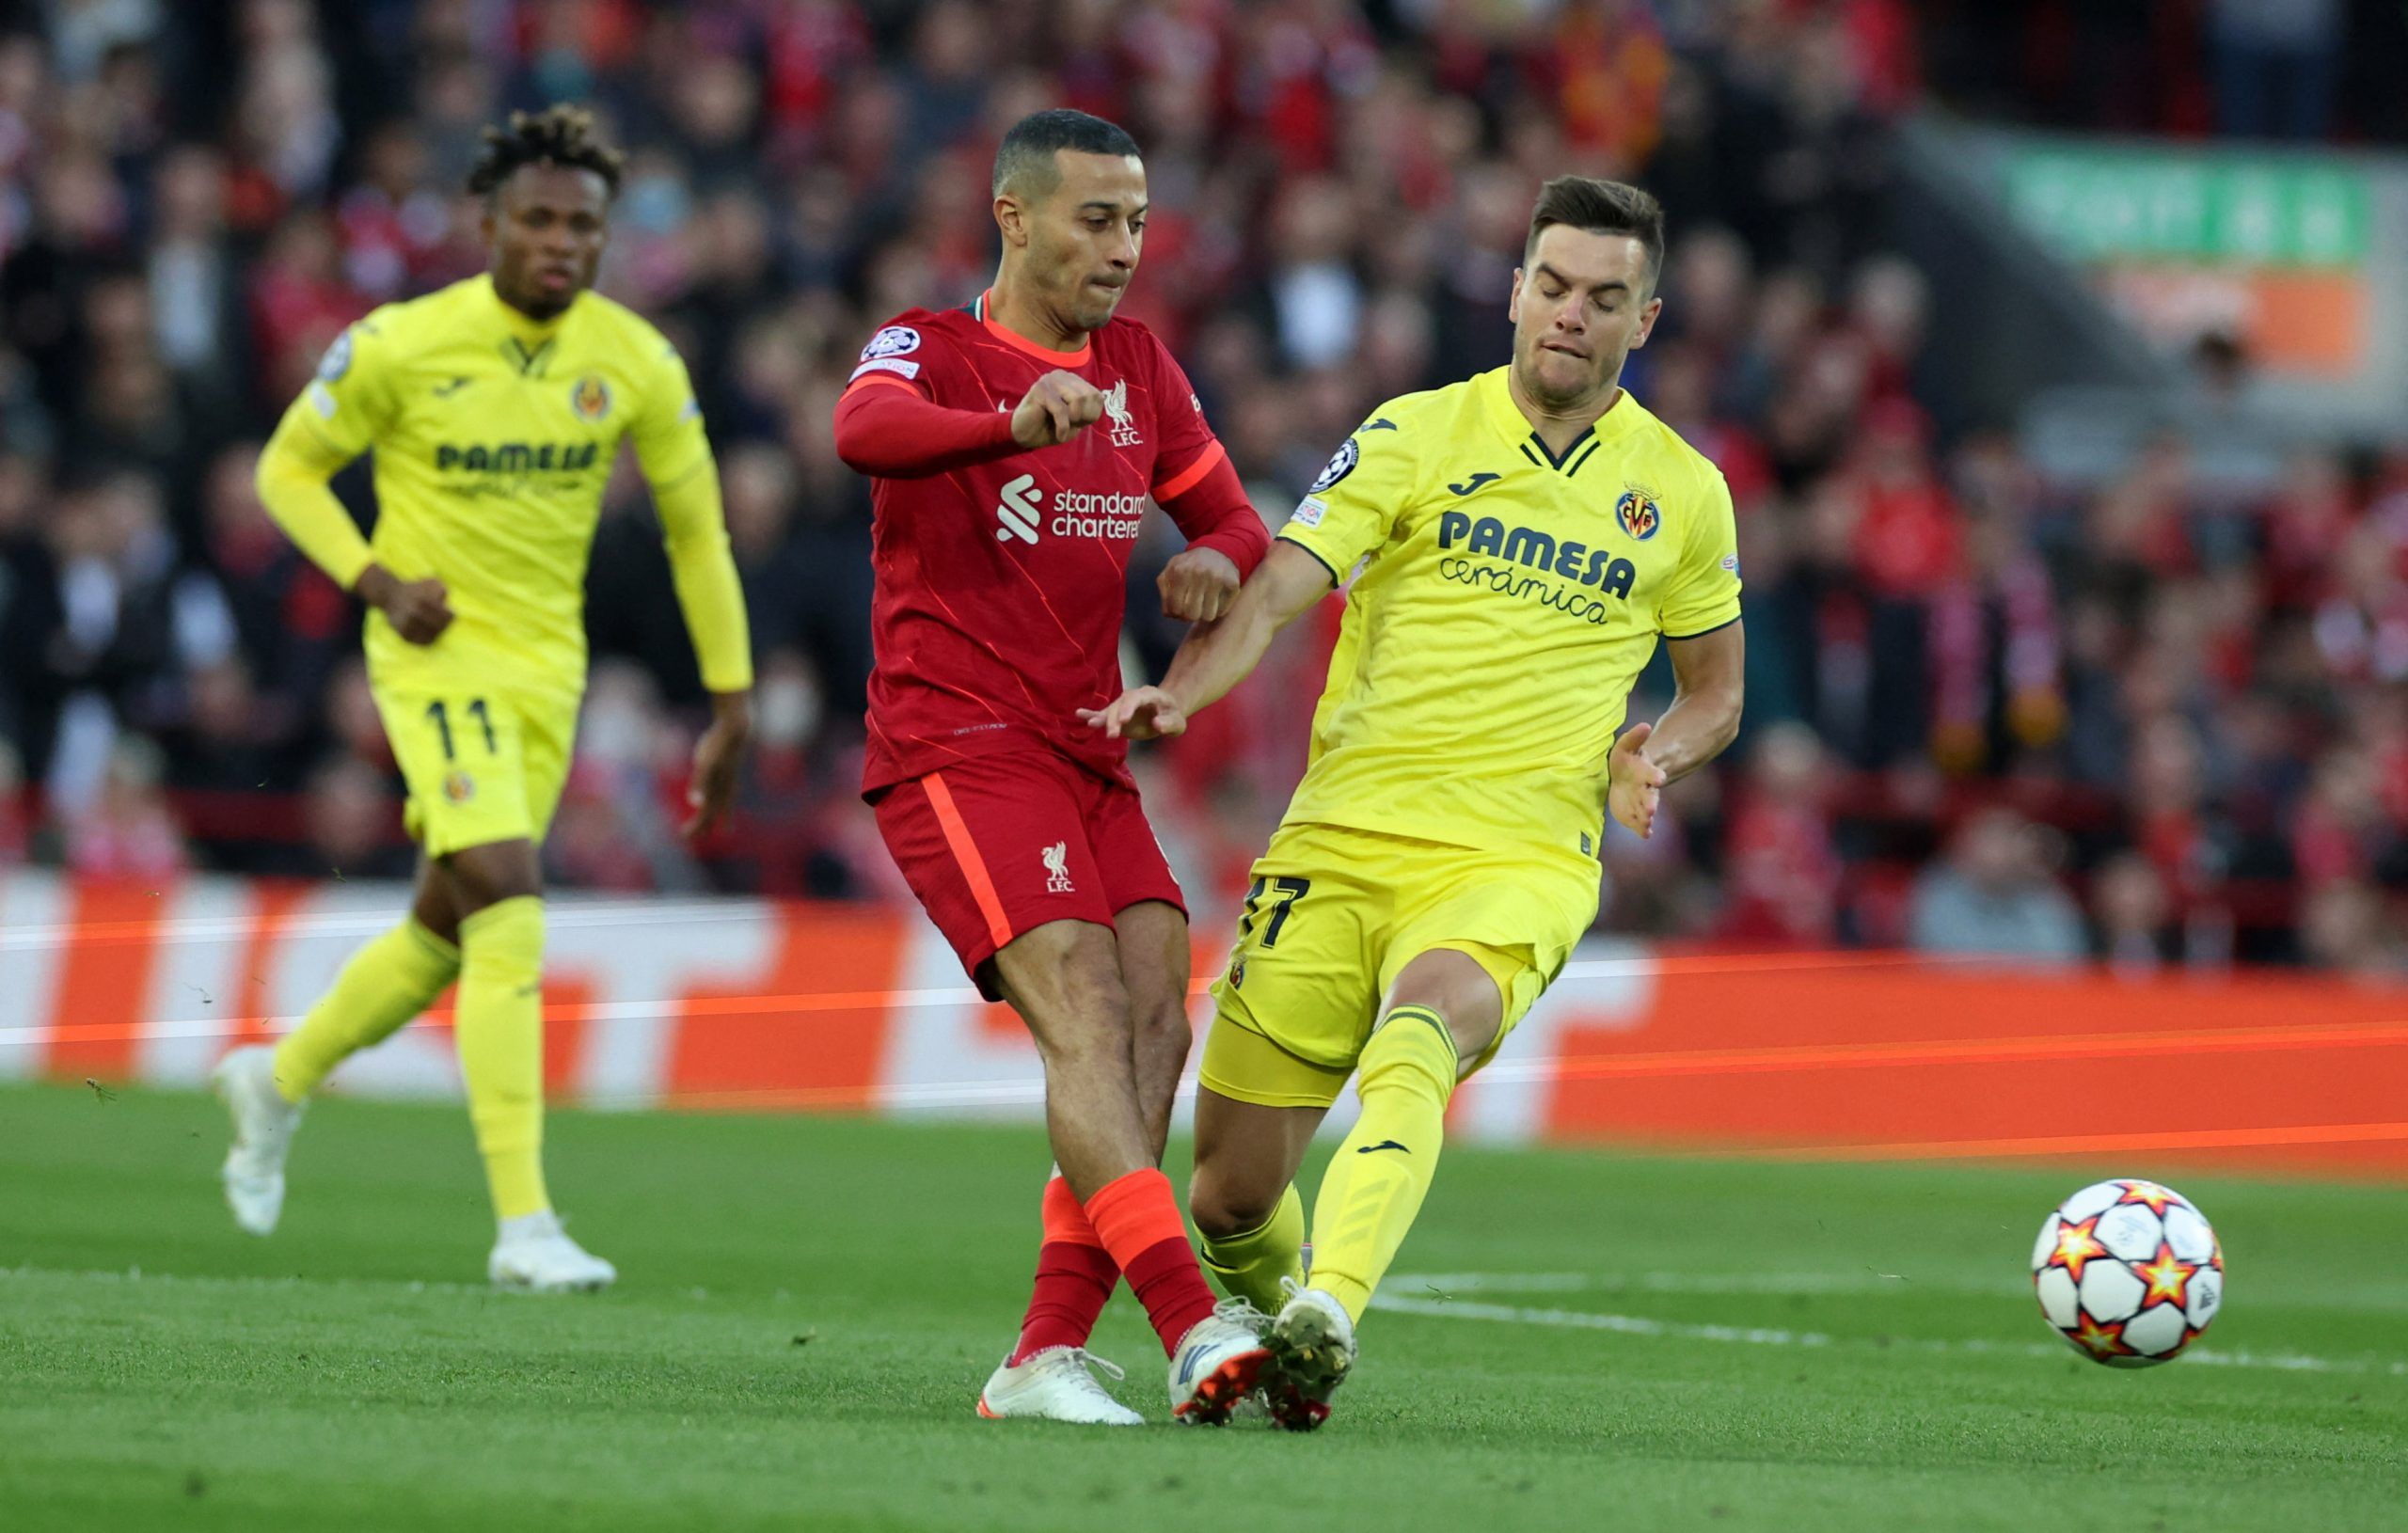 Soccer Football - Champions League - Semi Final - First Leg - Liverpool v Villarreal - Anfield, Liverpool, Britain - April 27, 2022 Liverpool's Thiago Alcantara in action with Villarreal's Giovani Lo Celso REUTERS/Phil Noble